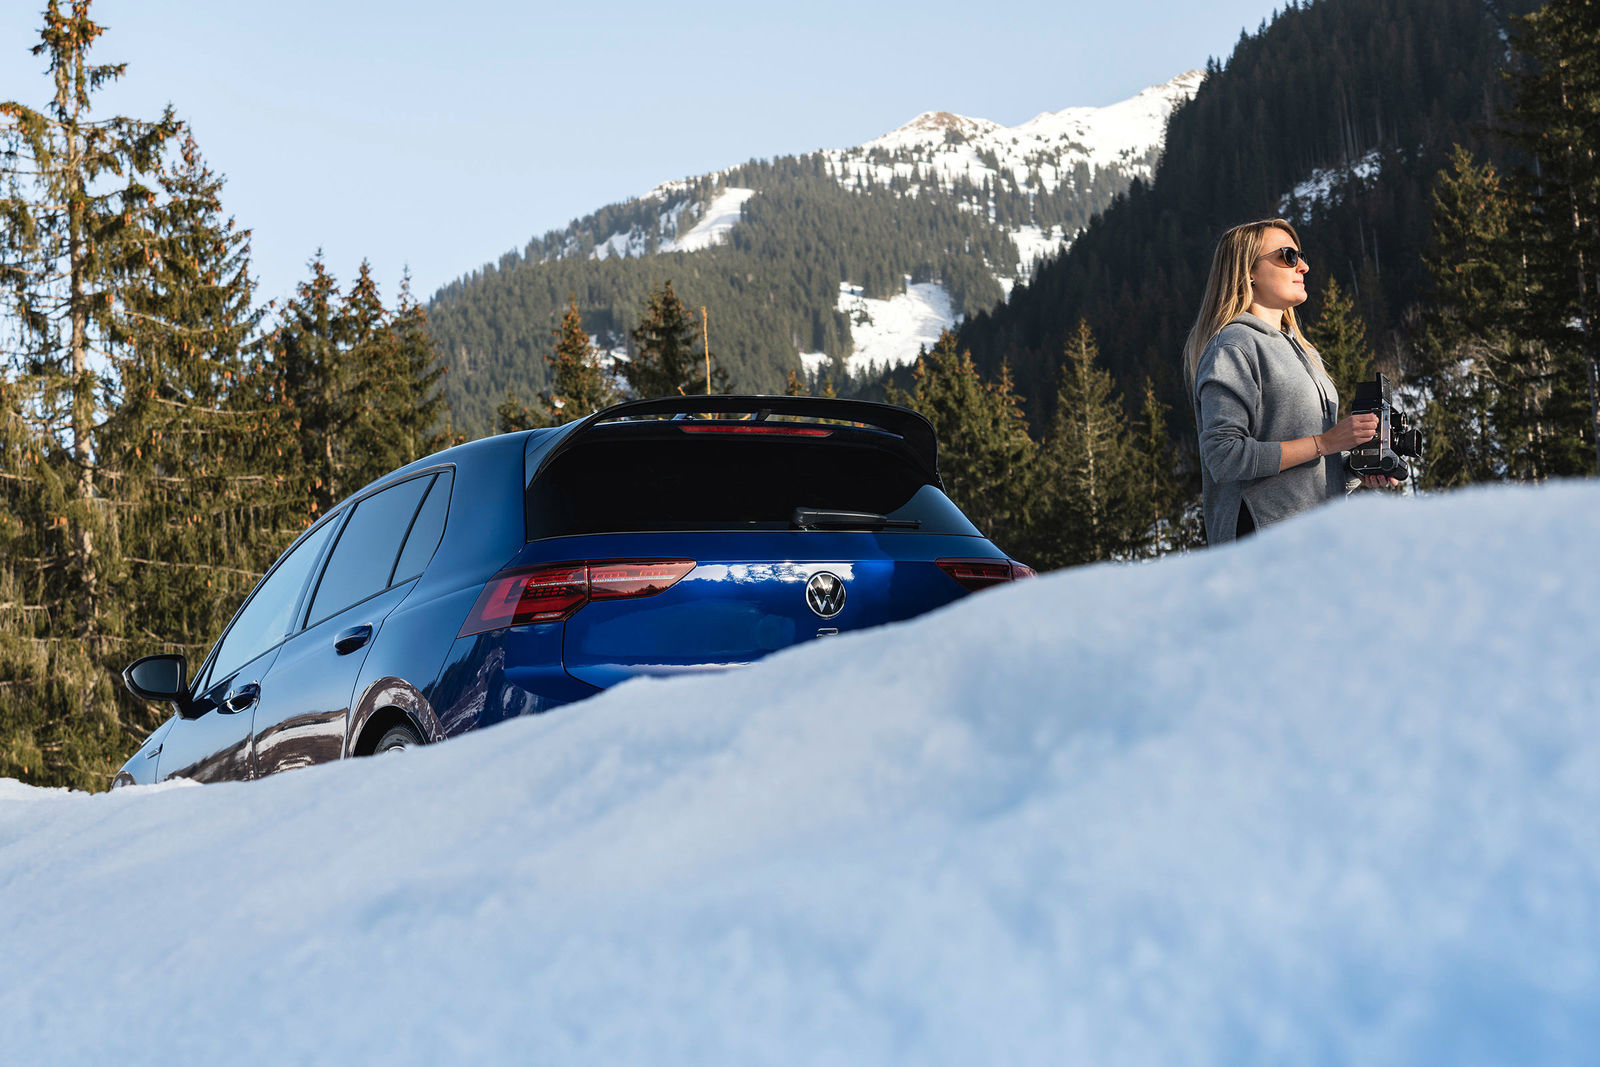 Story: Golf R-oad trip: On the road with Jasmin Preisig